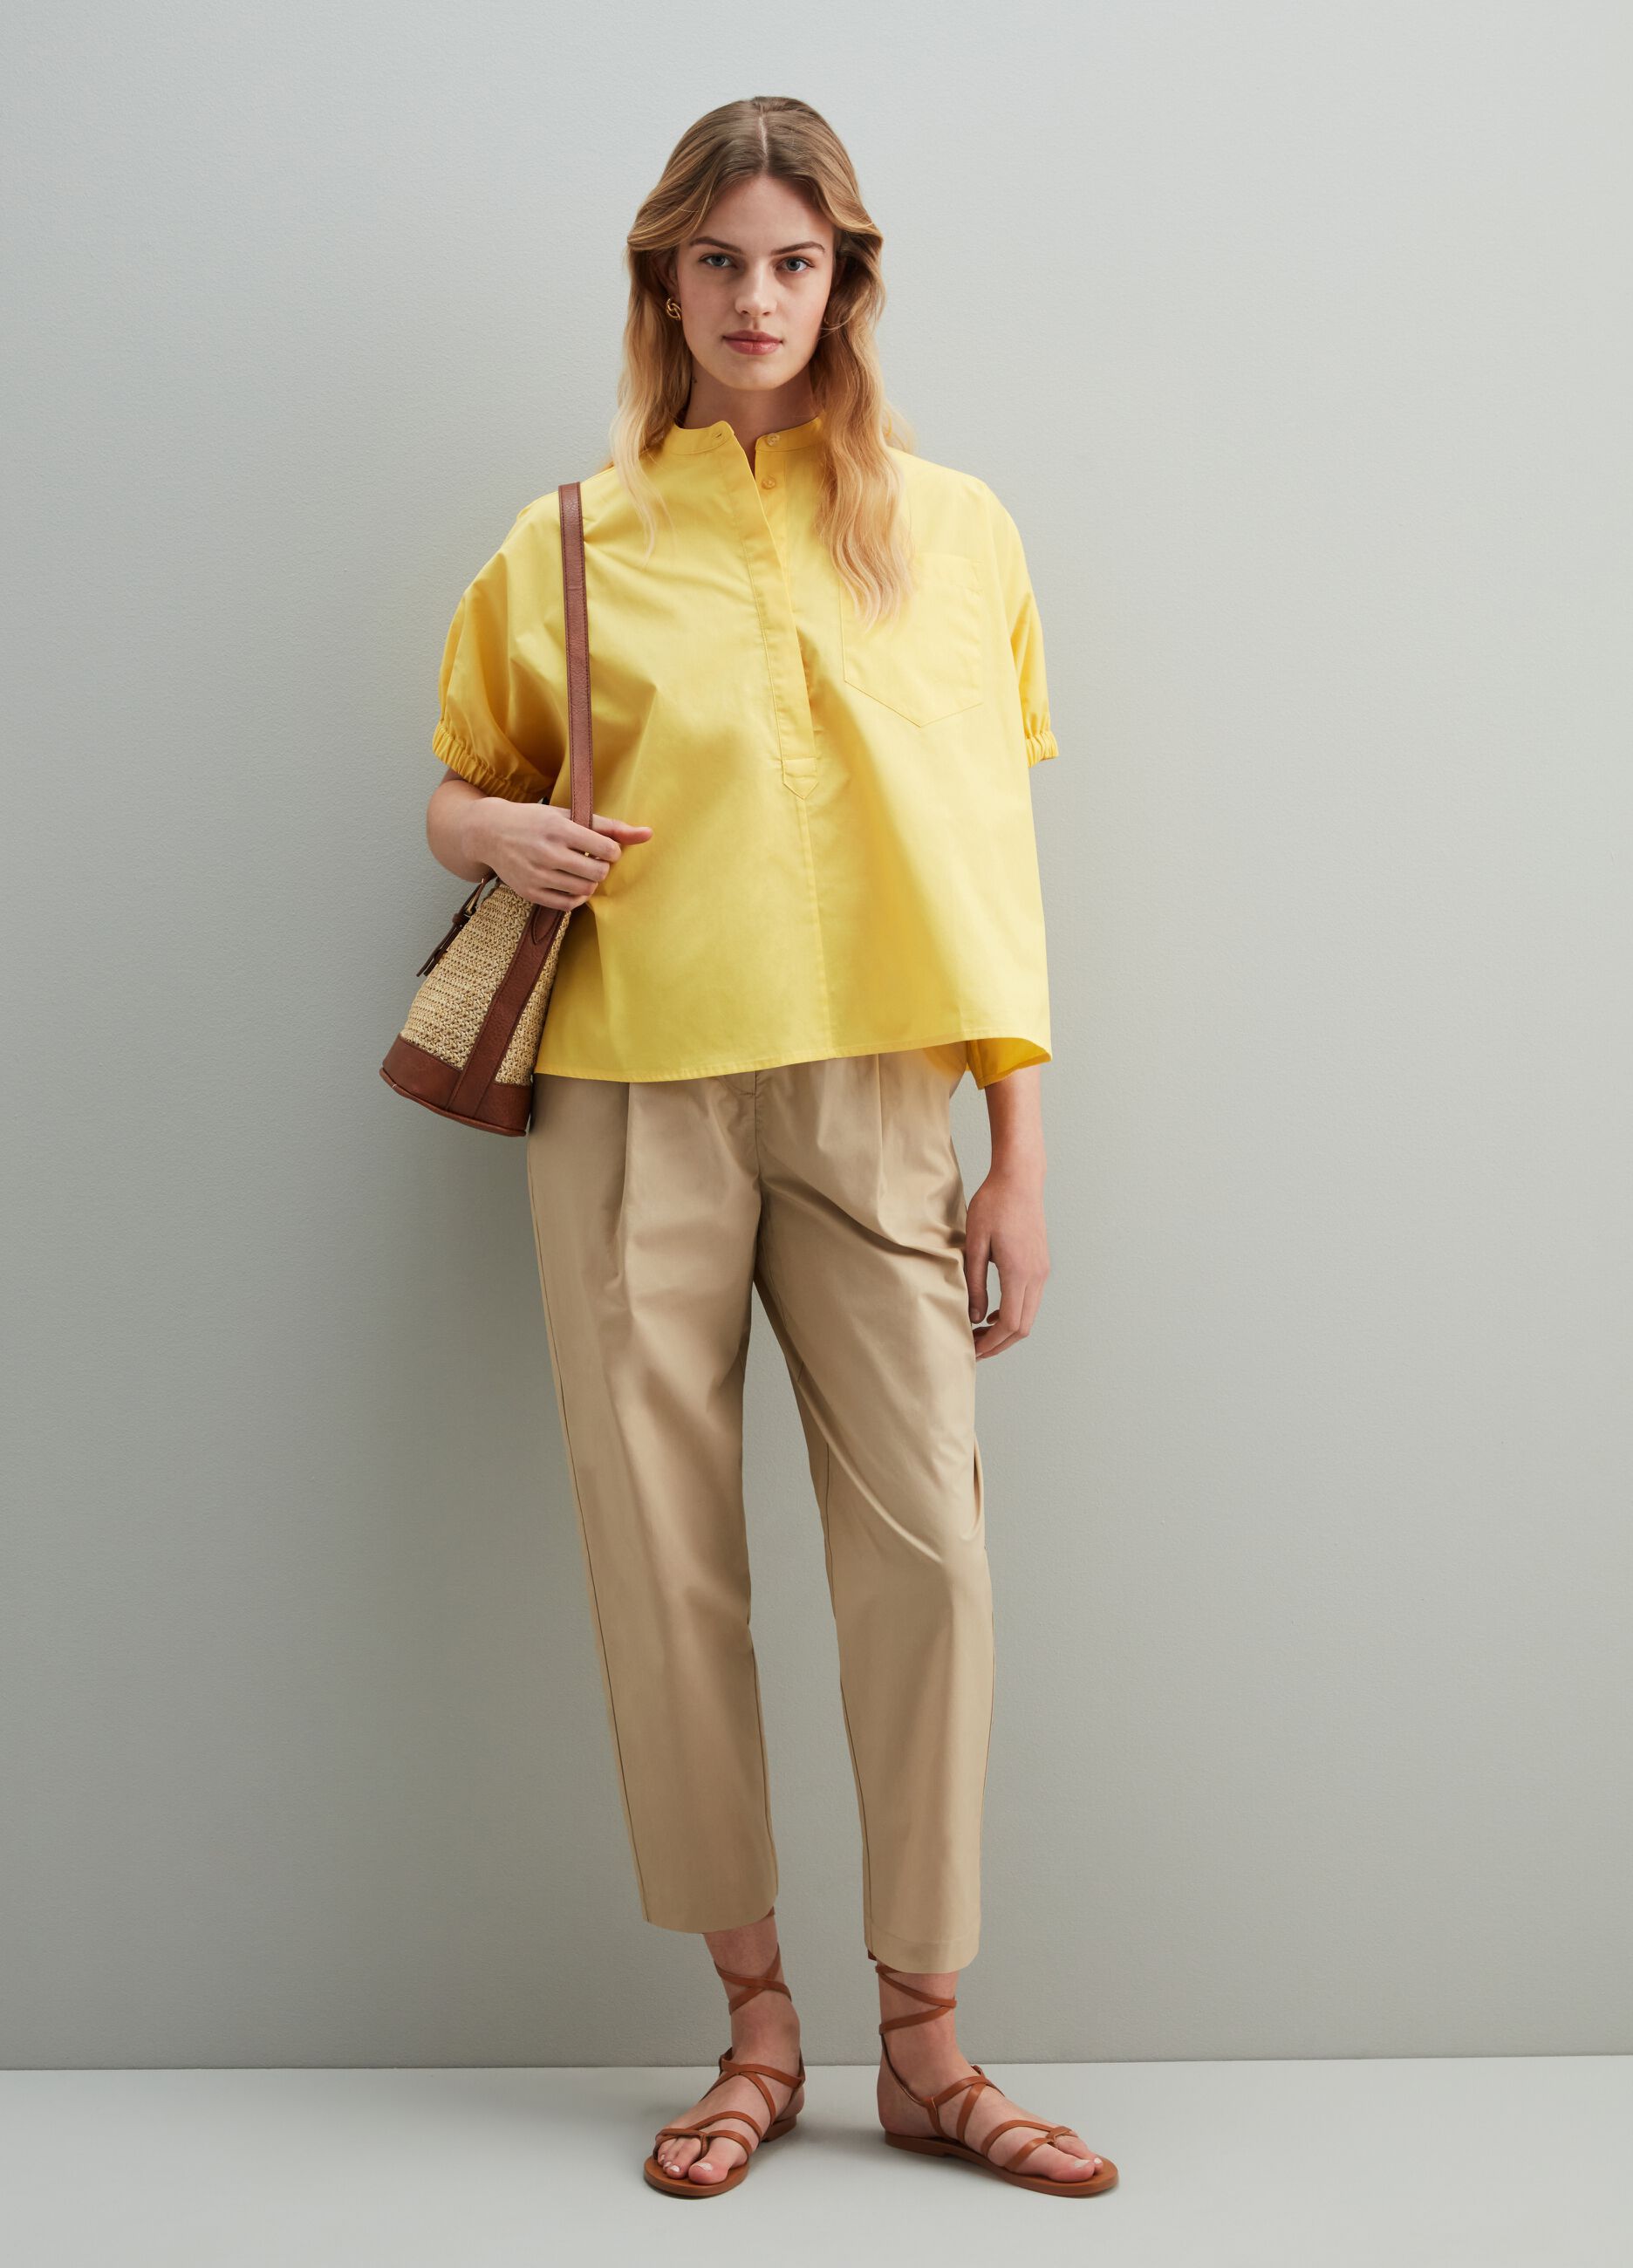 High-waisted cotton trousers